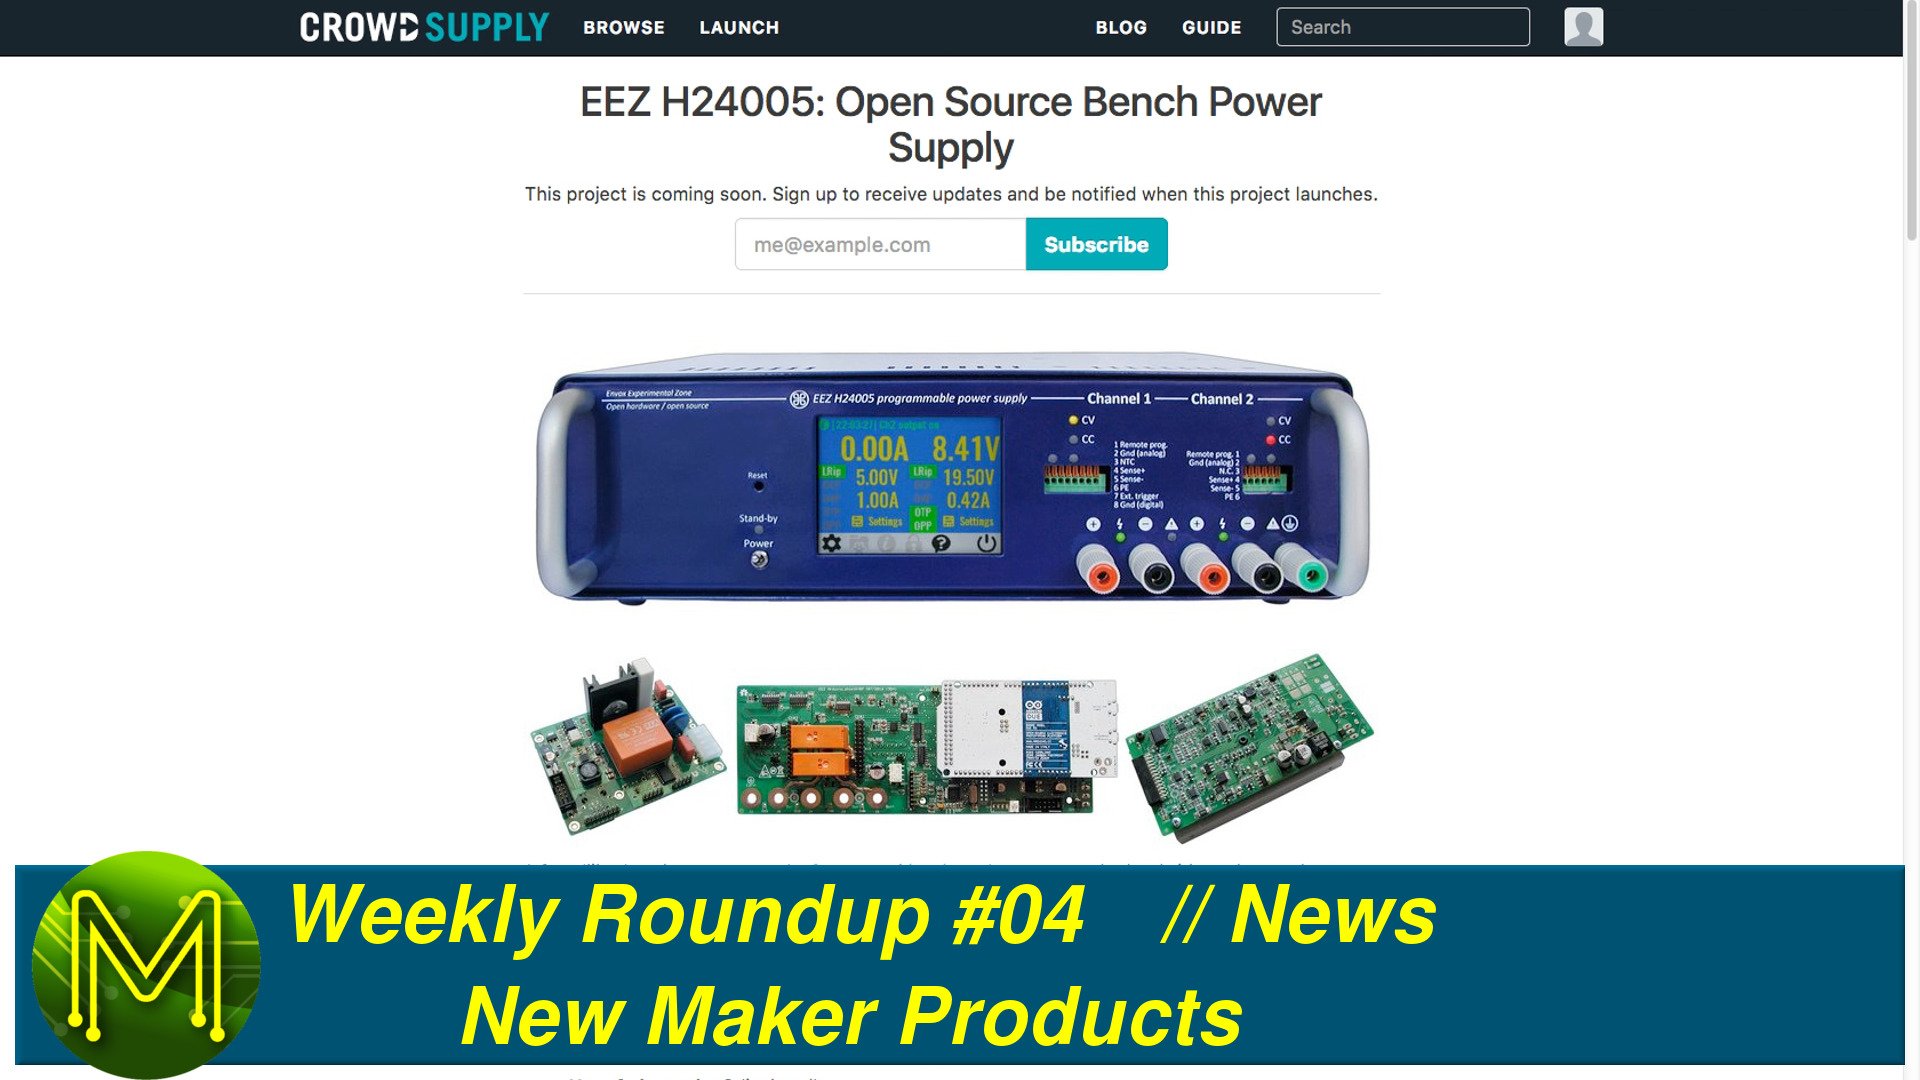 Weekly Roundup #04 - New Maker Products // News